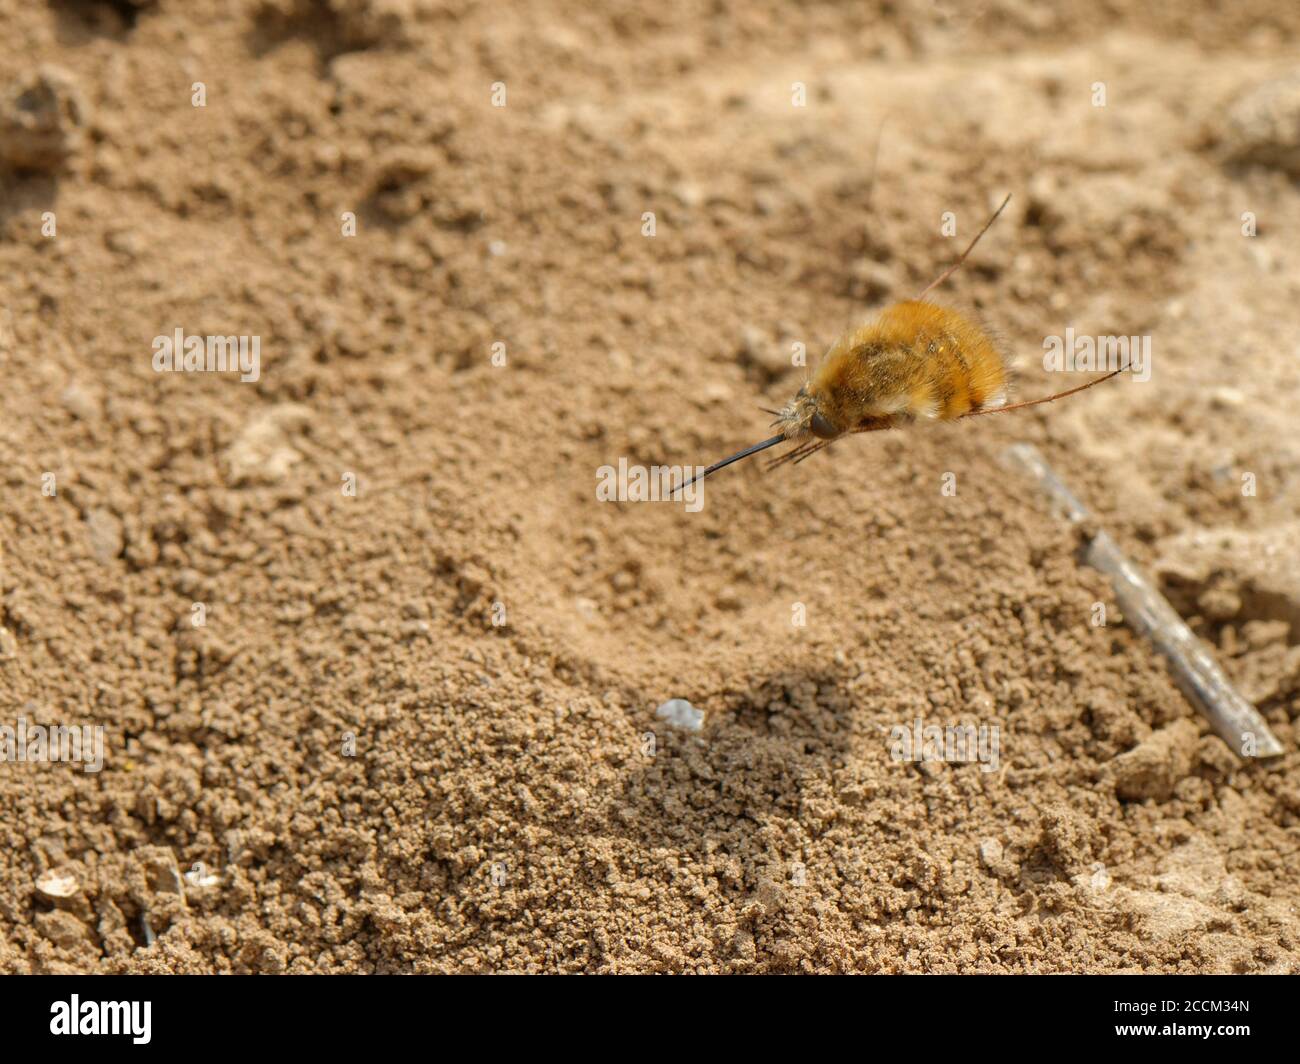 Dark-edged bee fly (Bombylius major) female hovering while flicking its tail down to “bomb” eggs onto the ground near Mining bee host nest entrances. Stock Photo